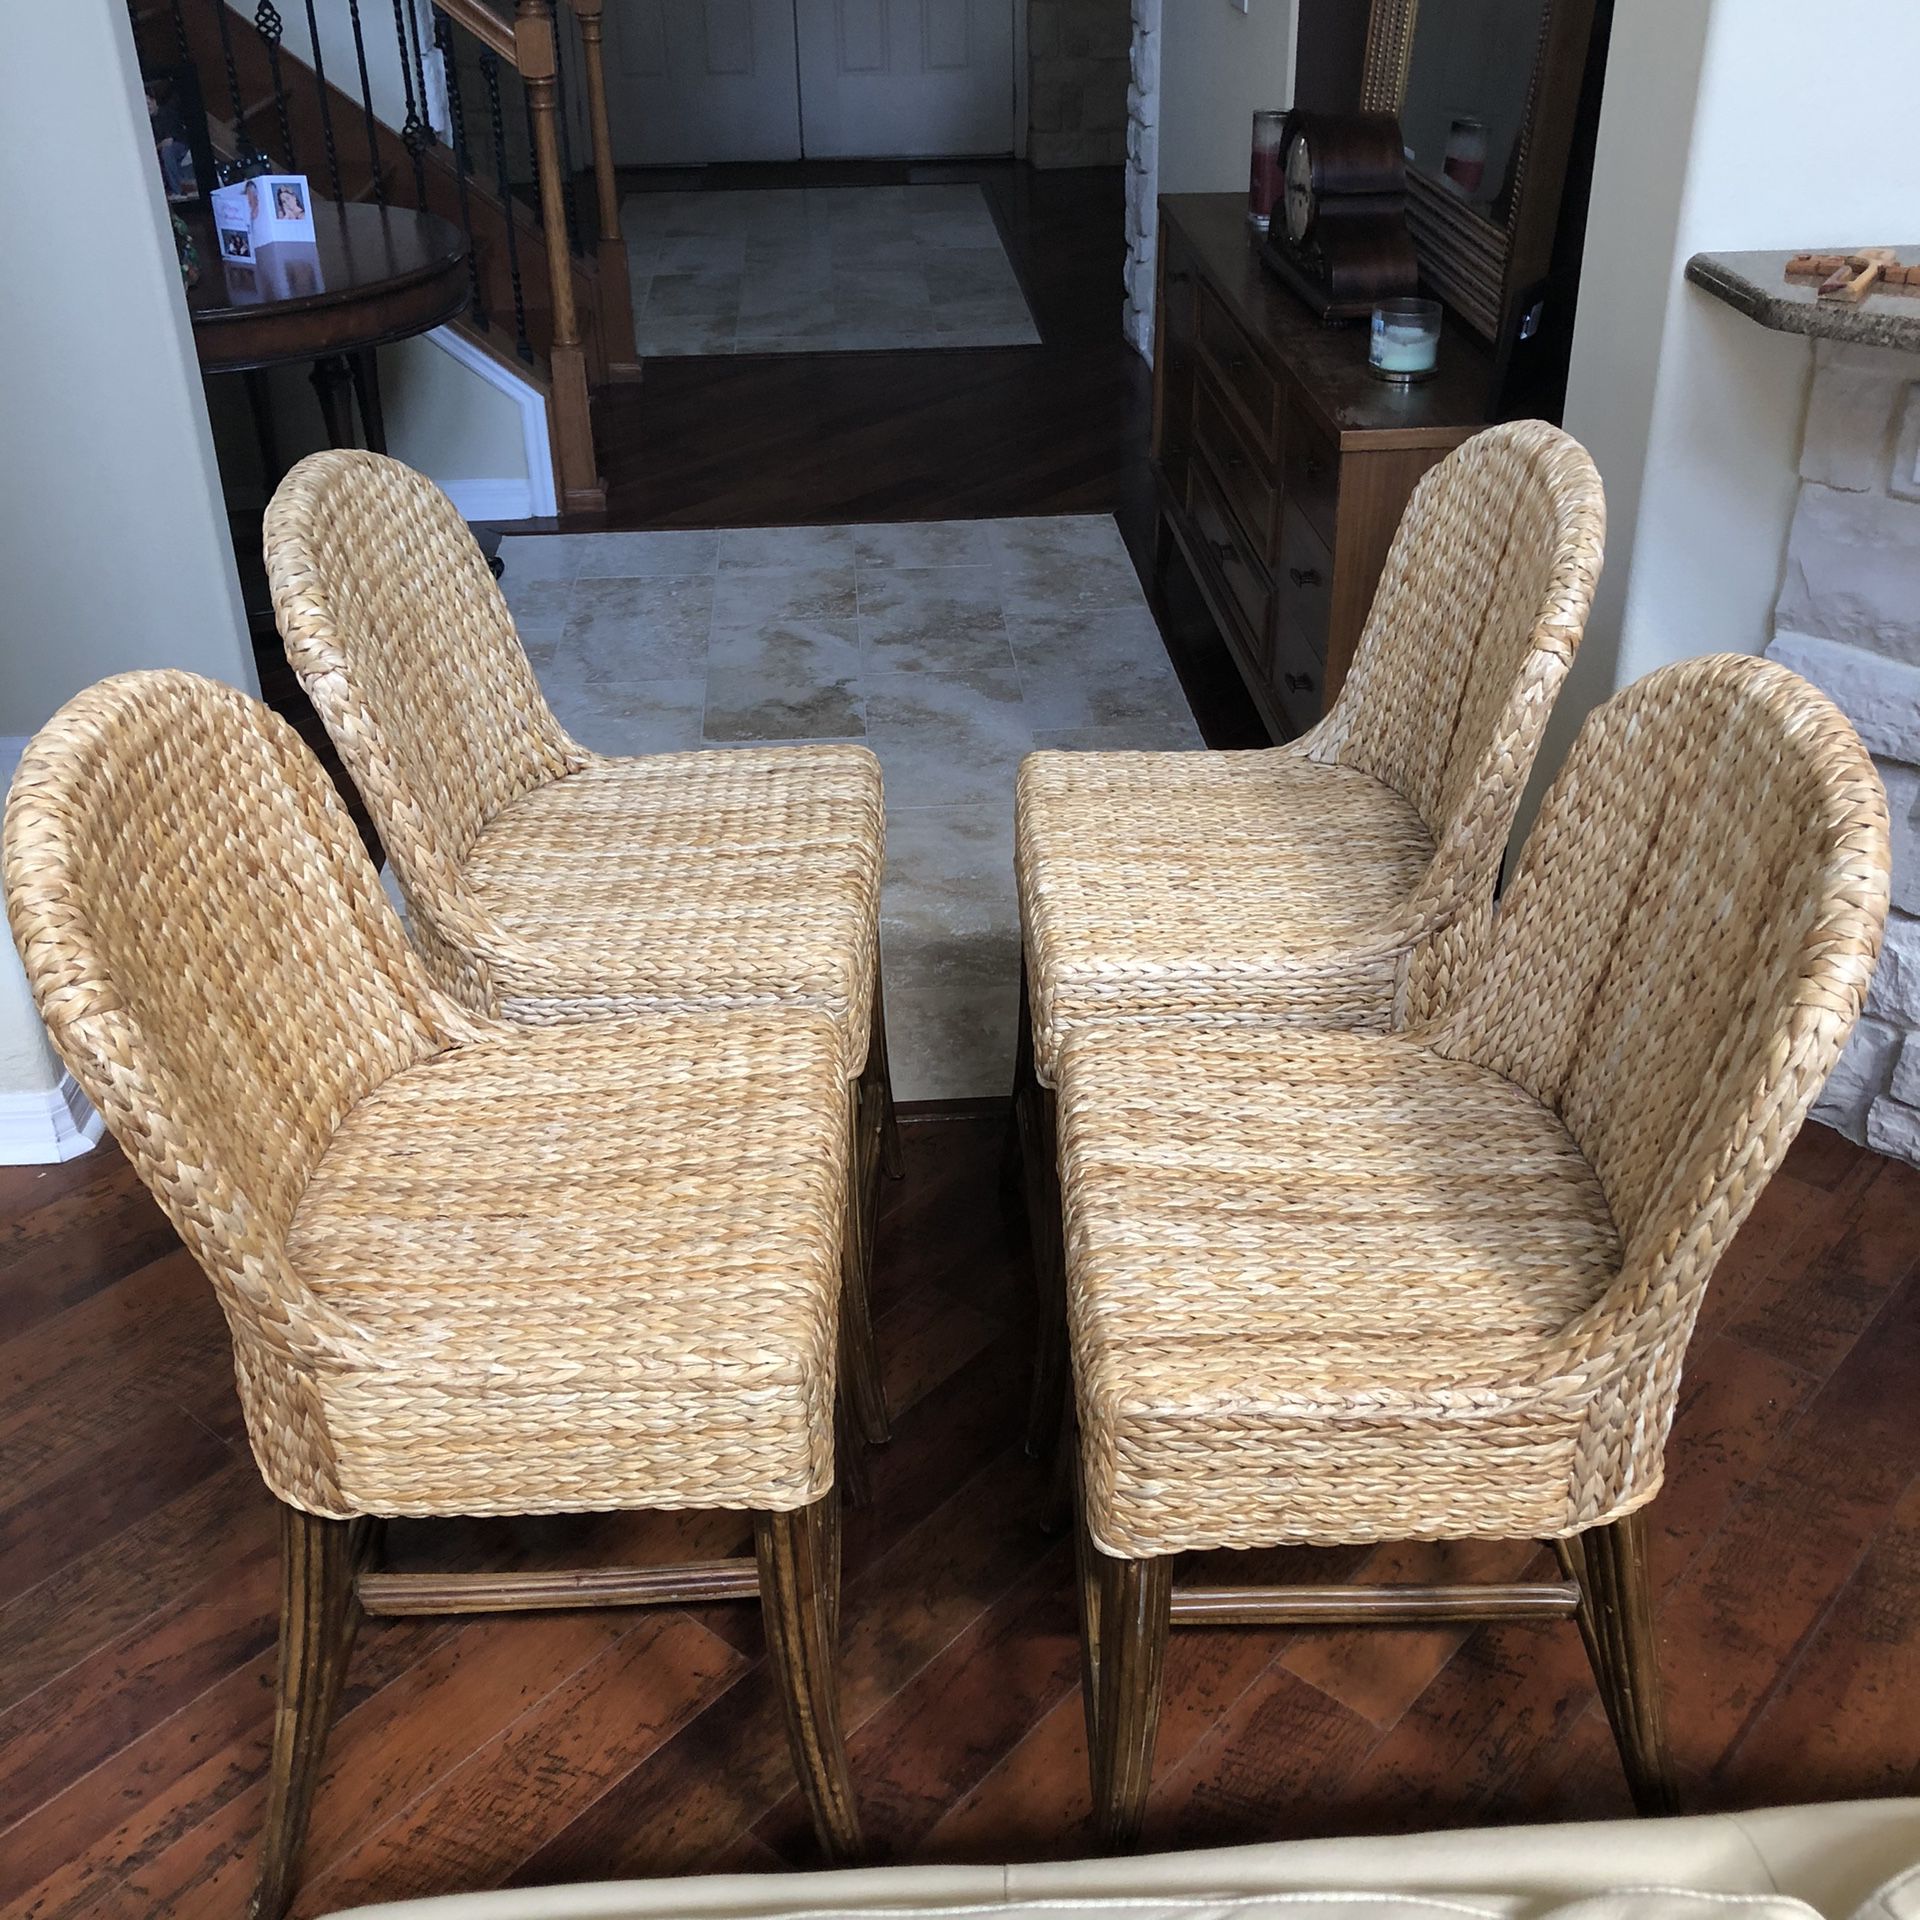 4 Pier One Wicker Bar/Counter Stool Chairs